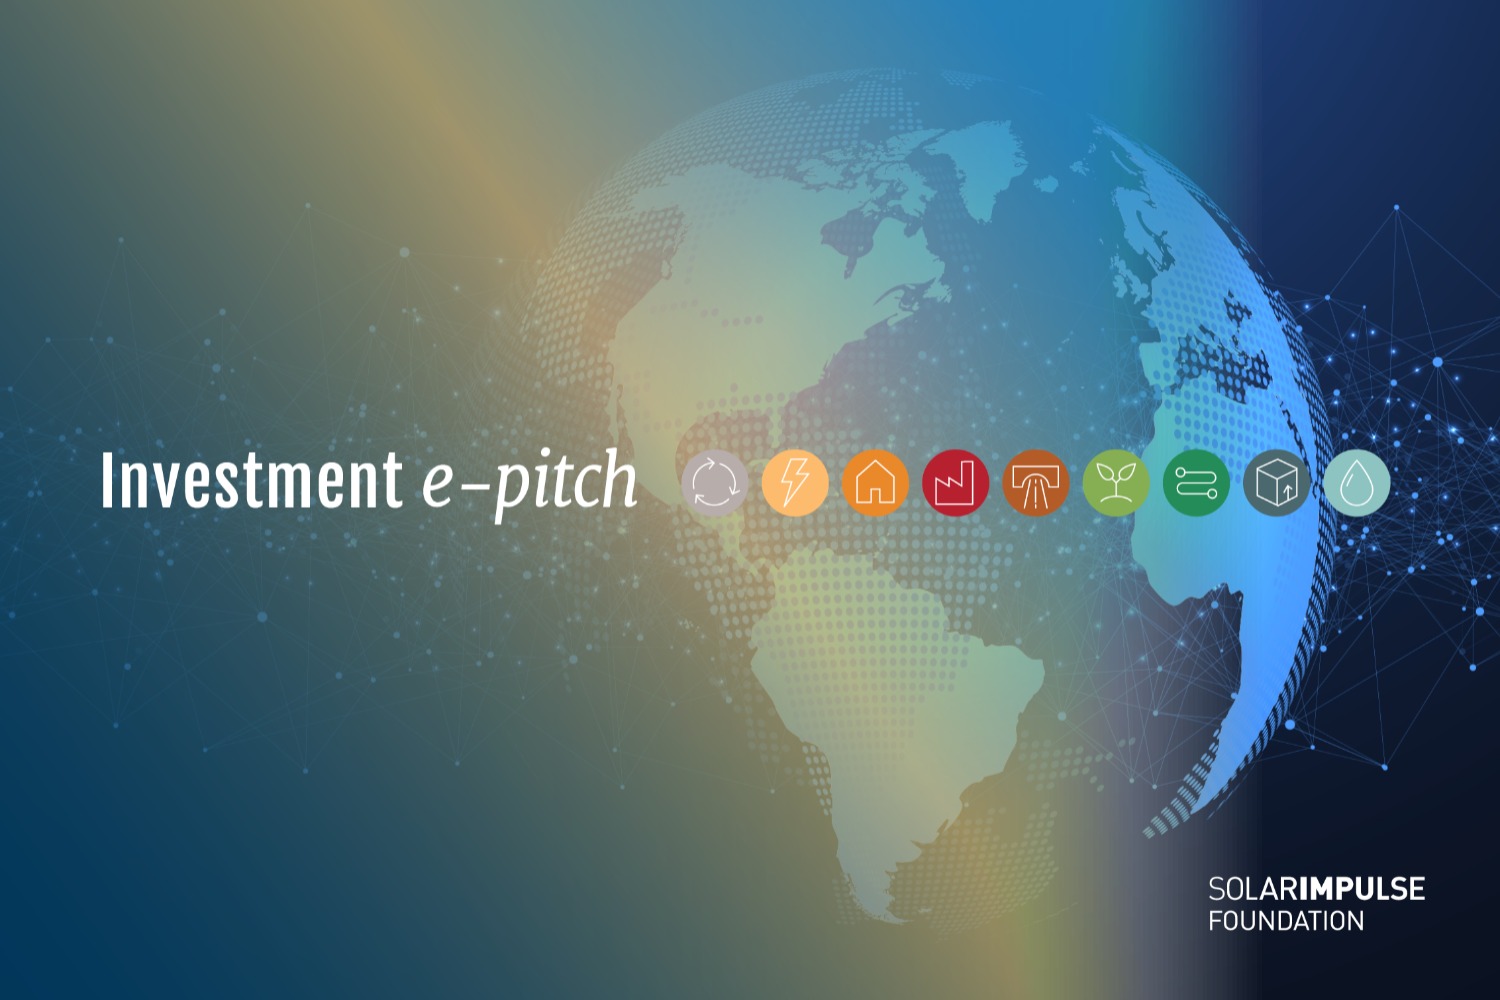 Sustainable Fashion | Investment e-pitch